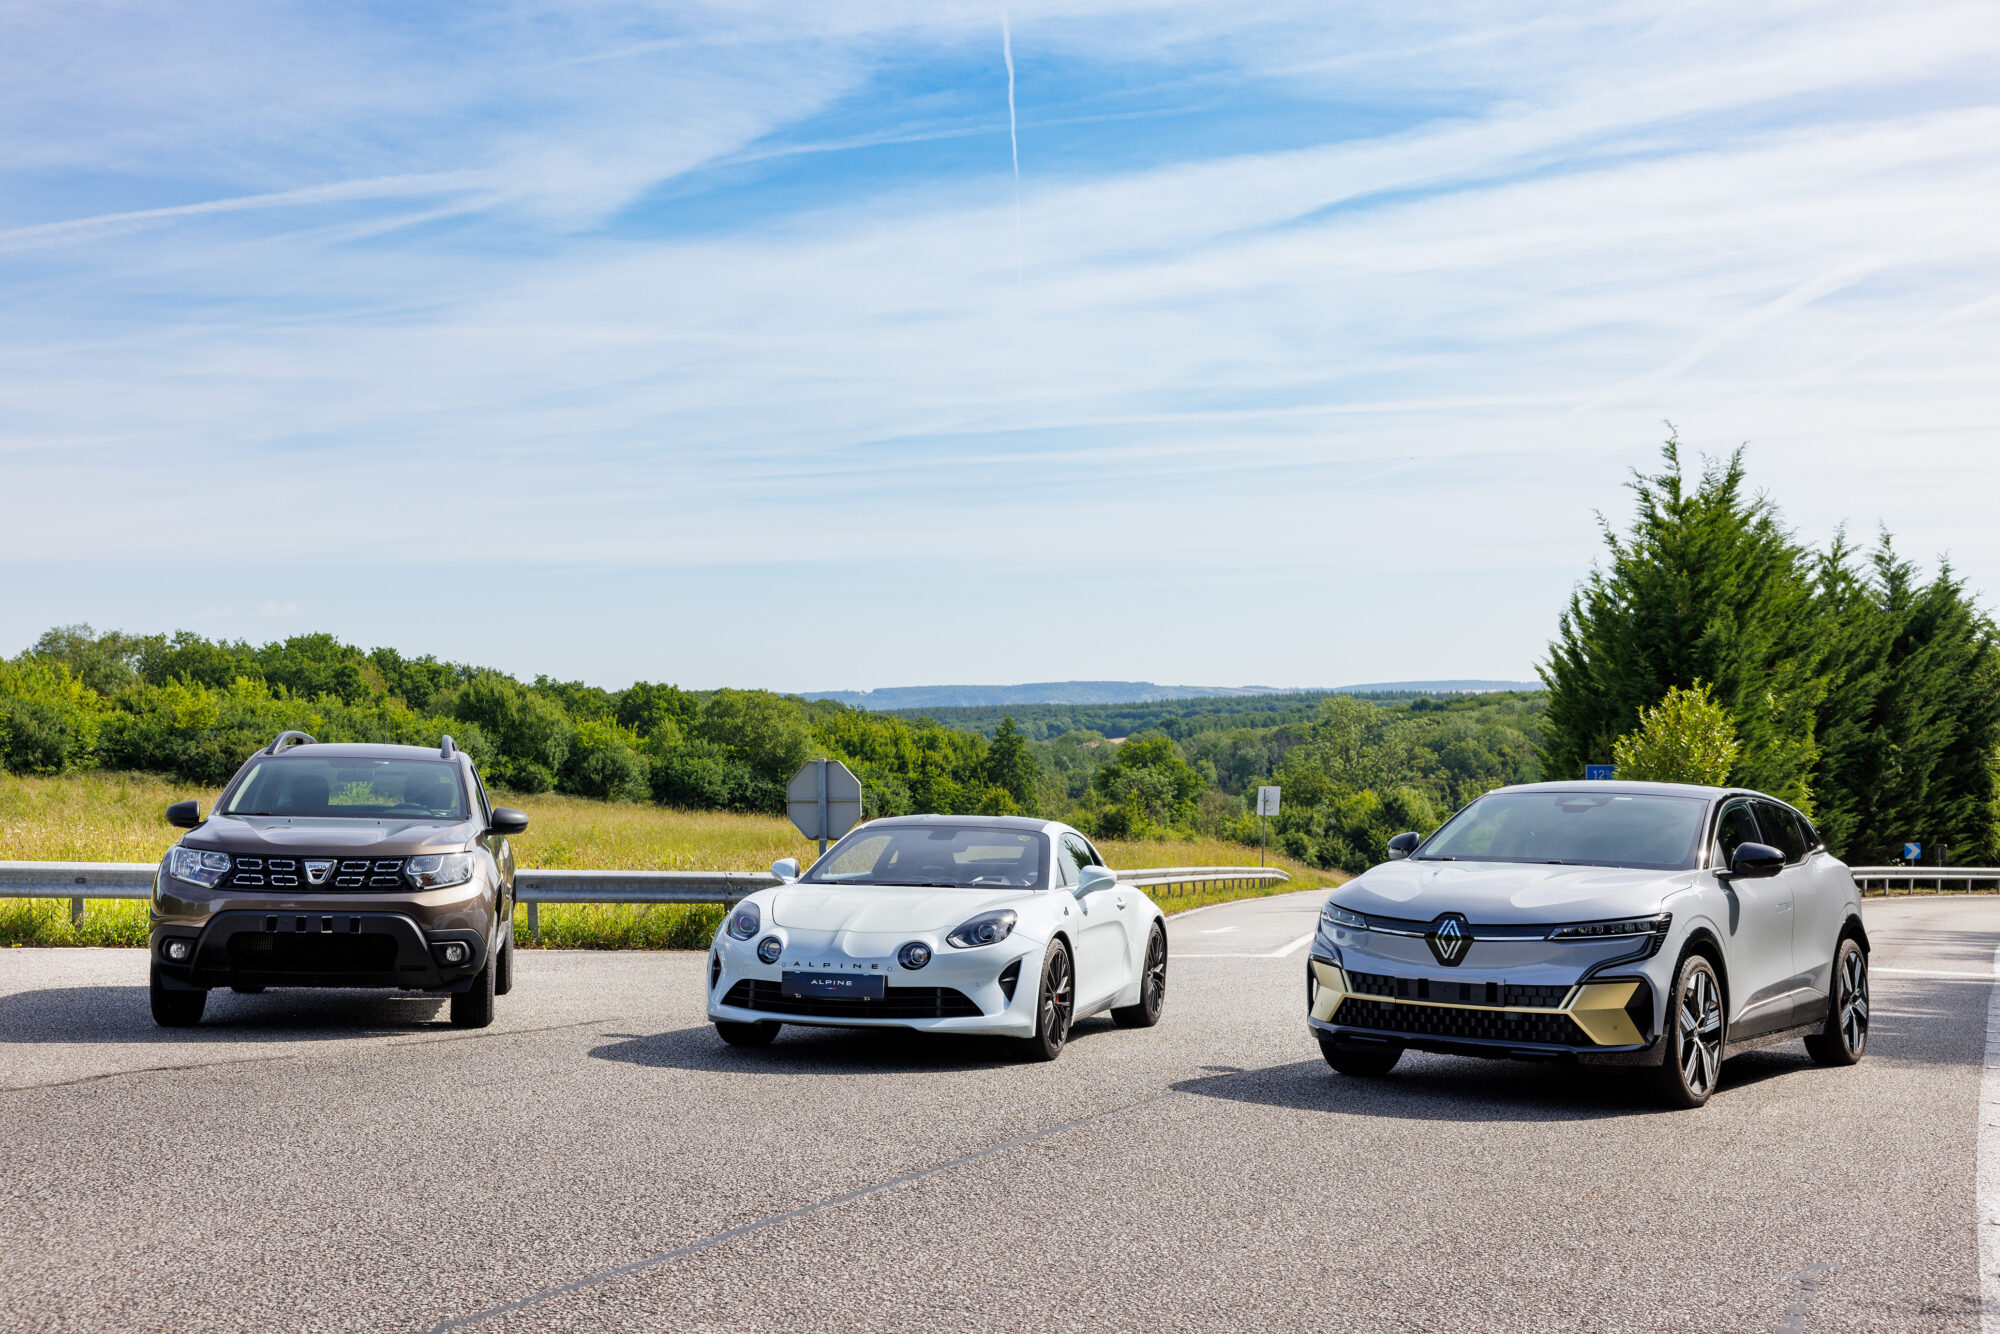 2022 - Story Renault Group - Aubevoye Technical Centre: 40 years of passion for cars and stories to tell